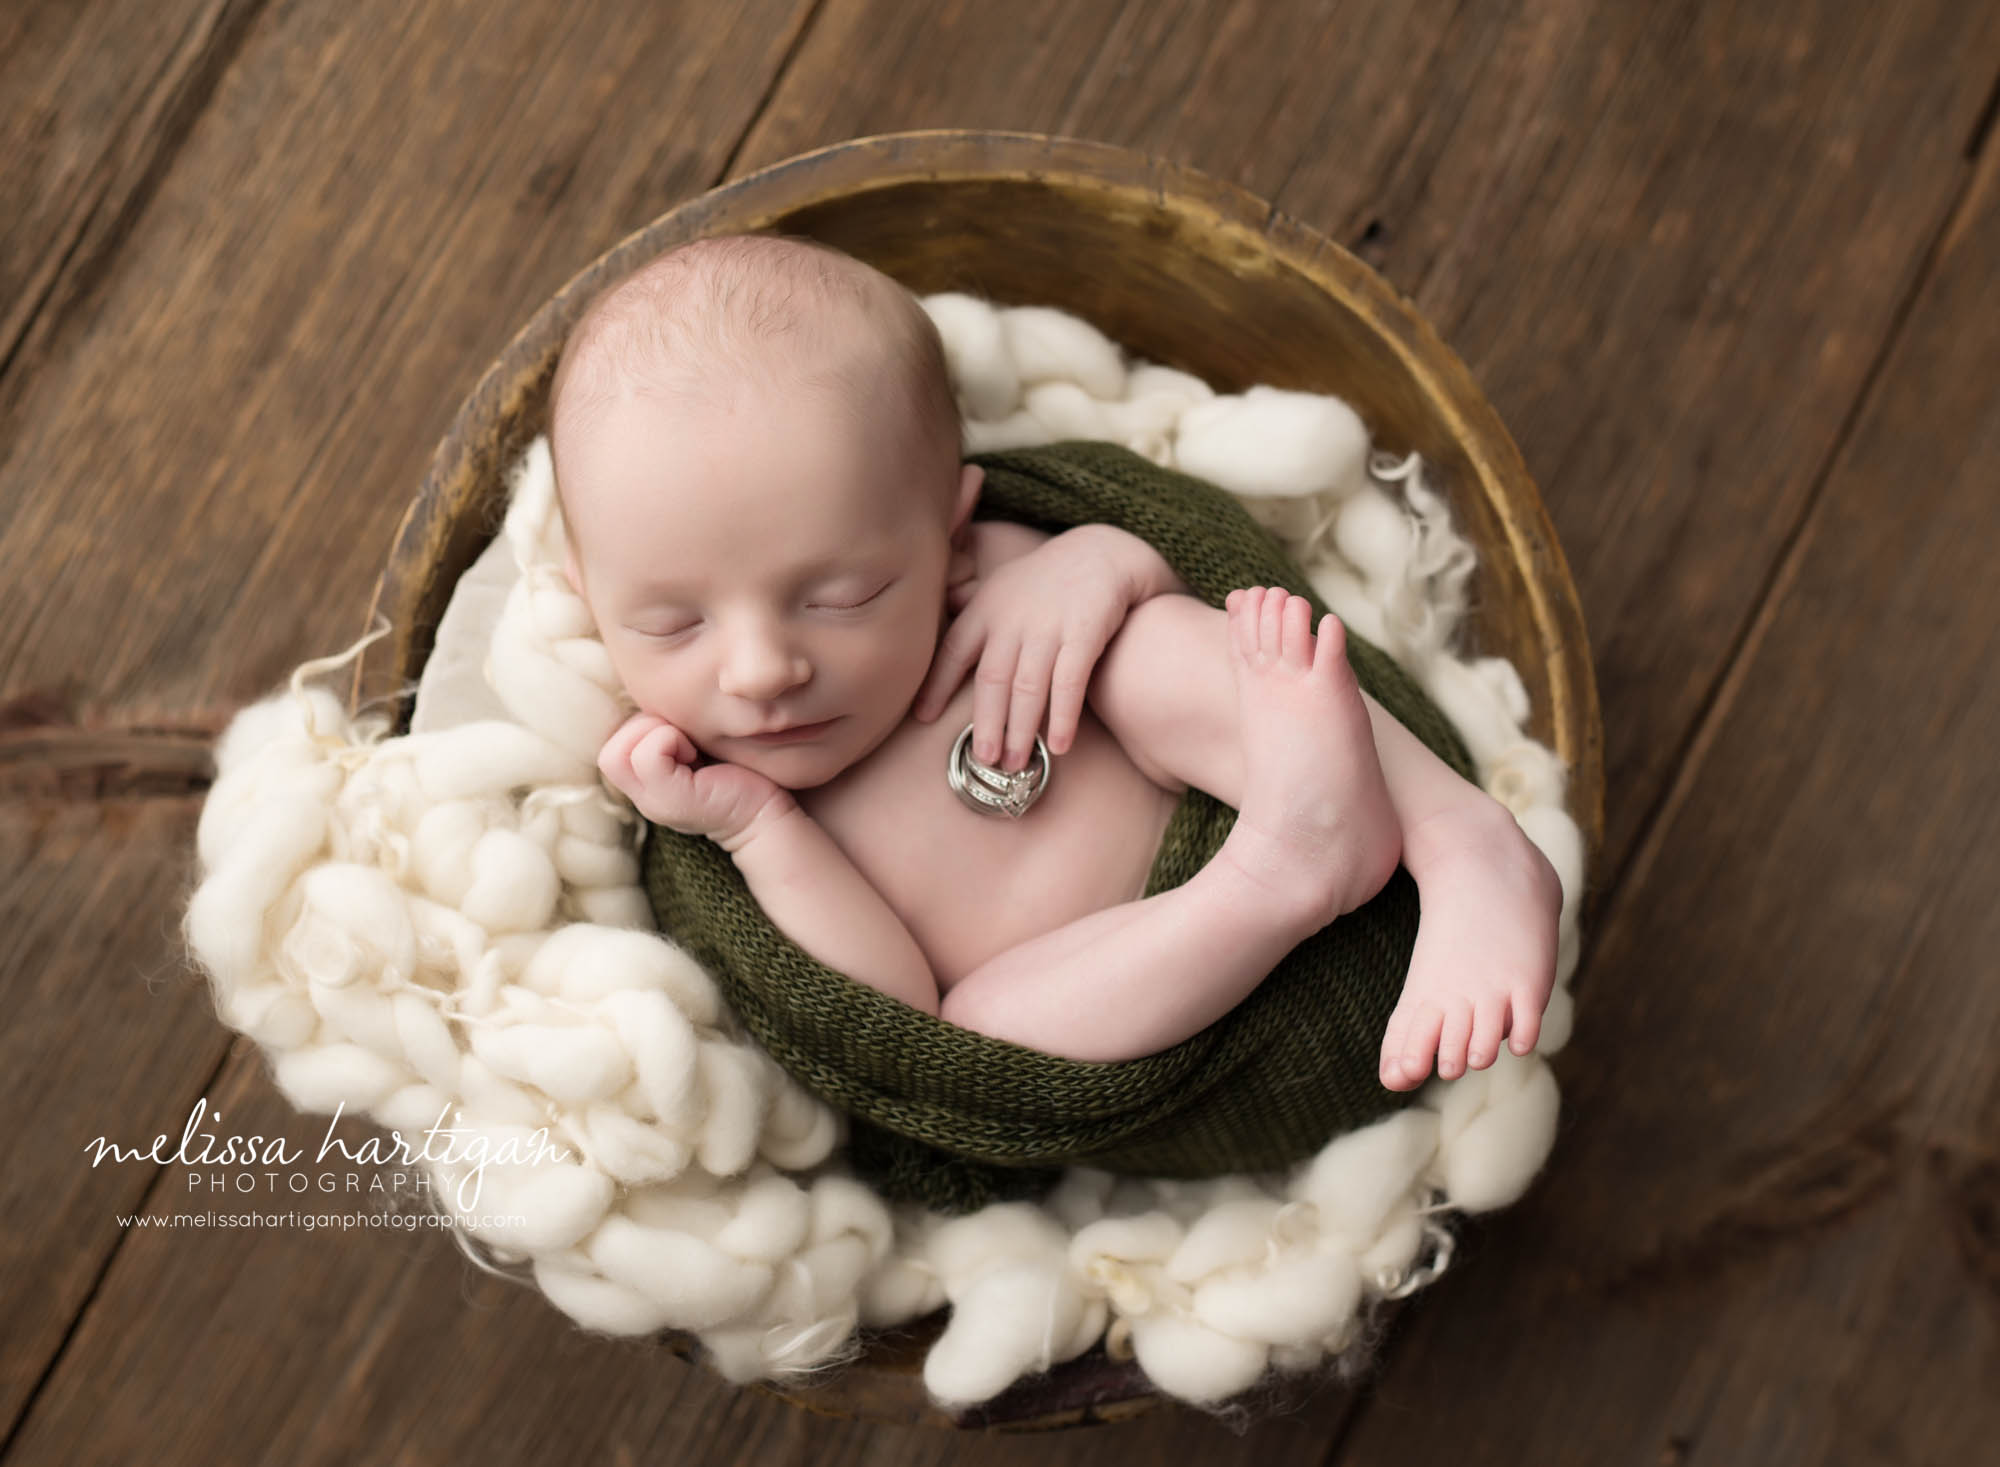 Melissa Hartigan Photography CT Newborn Photographer Stafford baby boy sleeping in wooden bowl with white chunky knit blanket in green wrap holding parent's wedding rings 